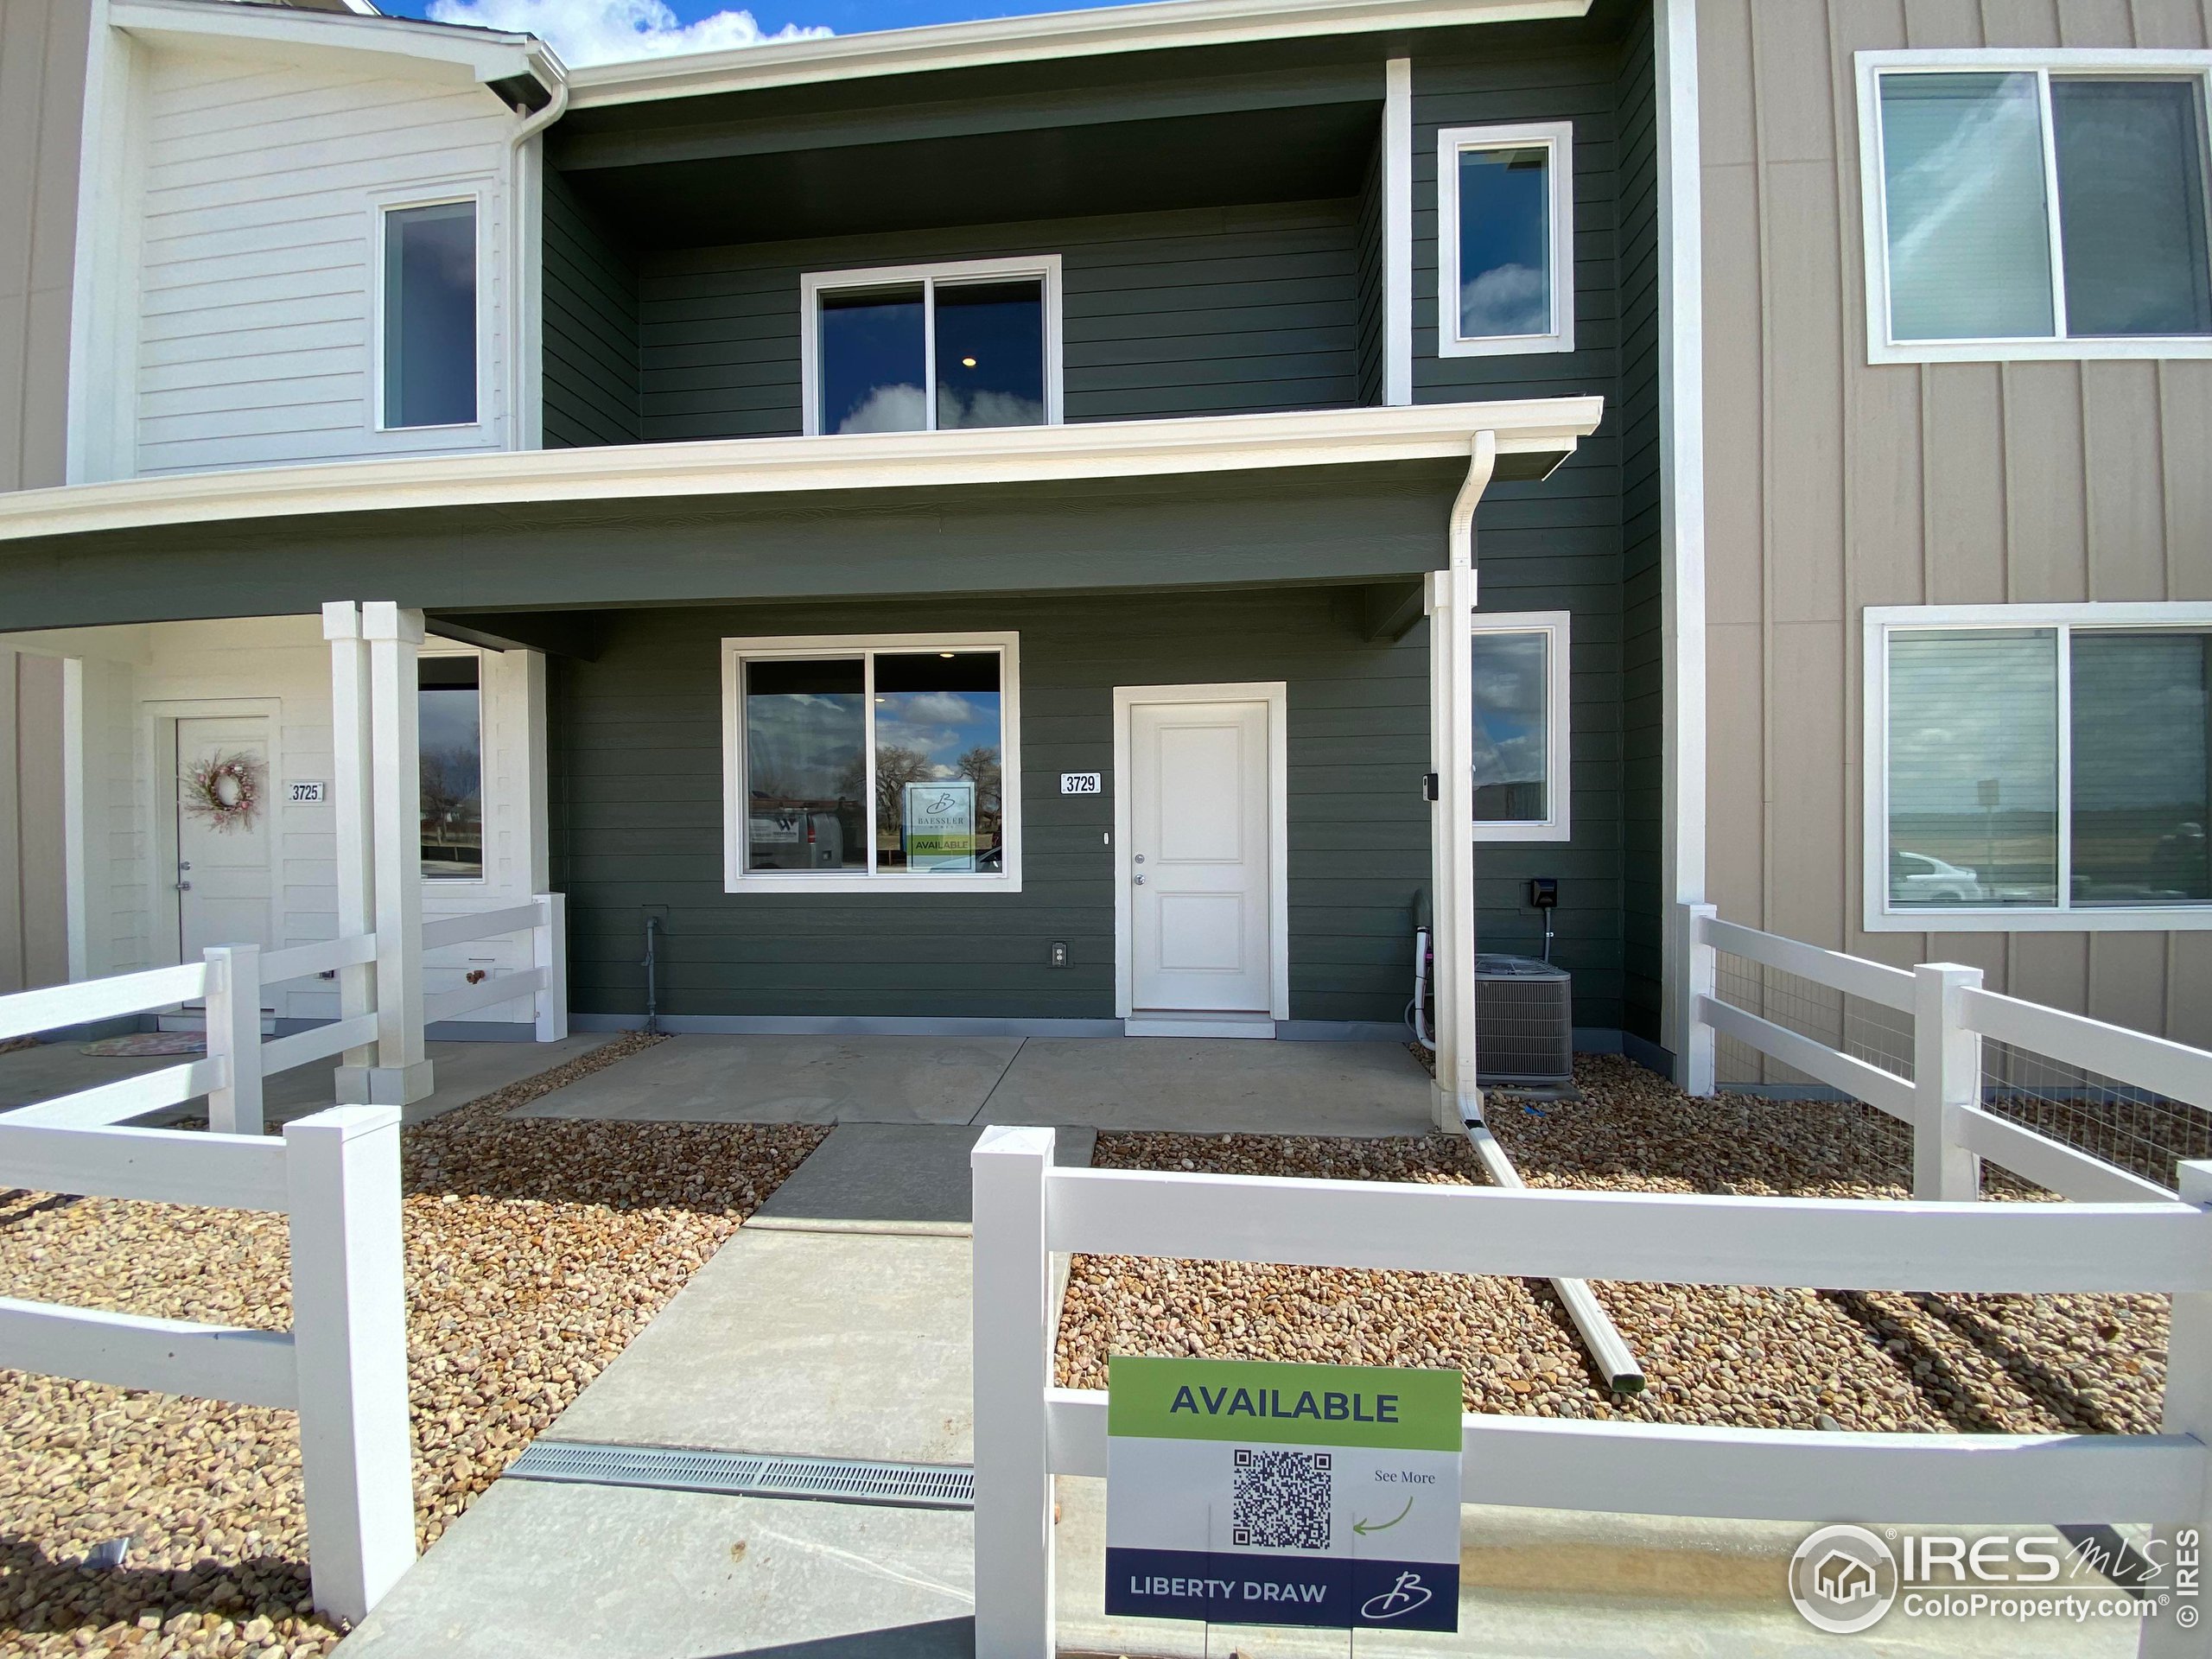 View Evans, CO 80620 townhome